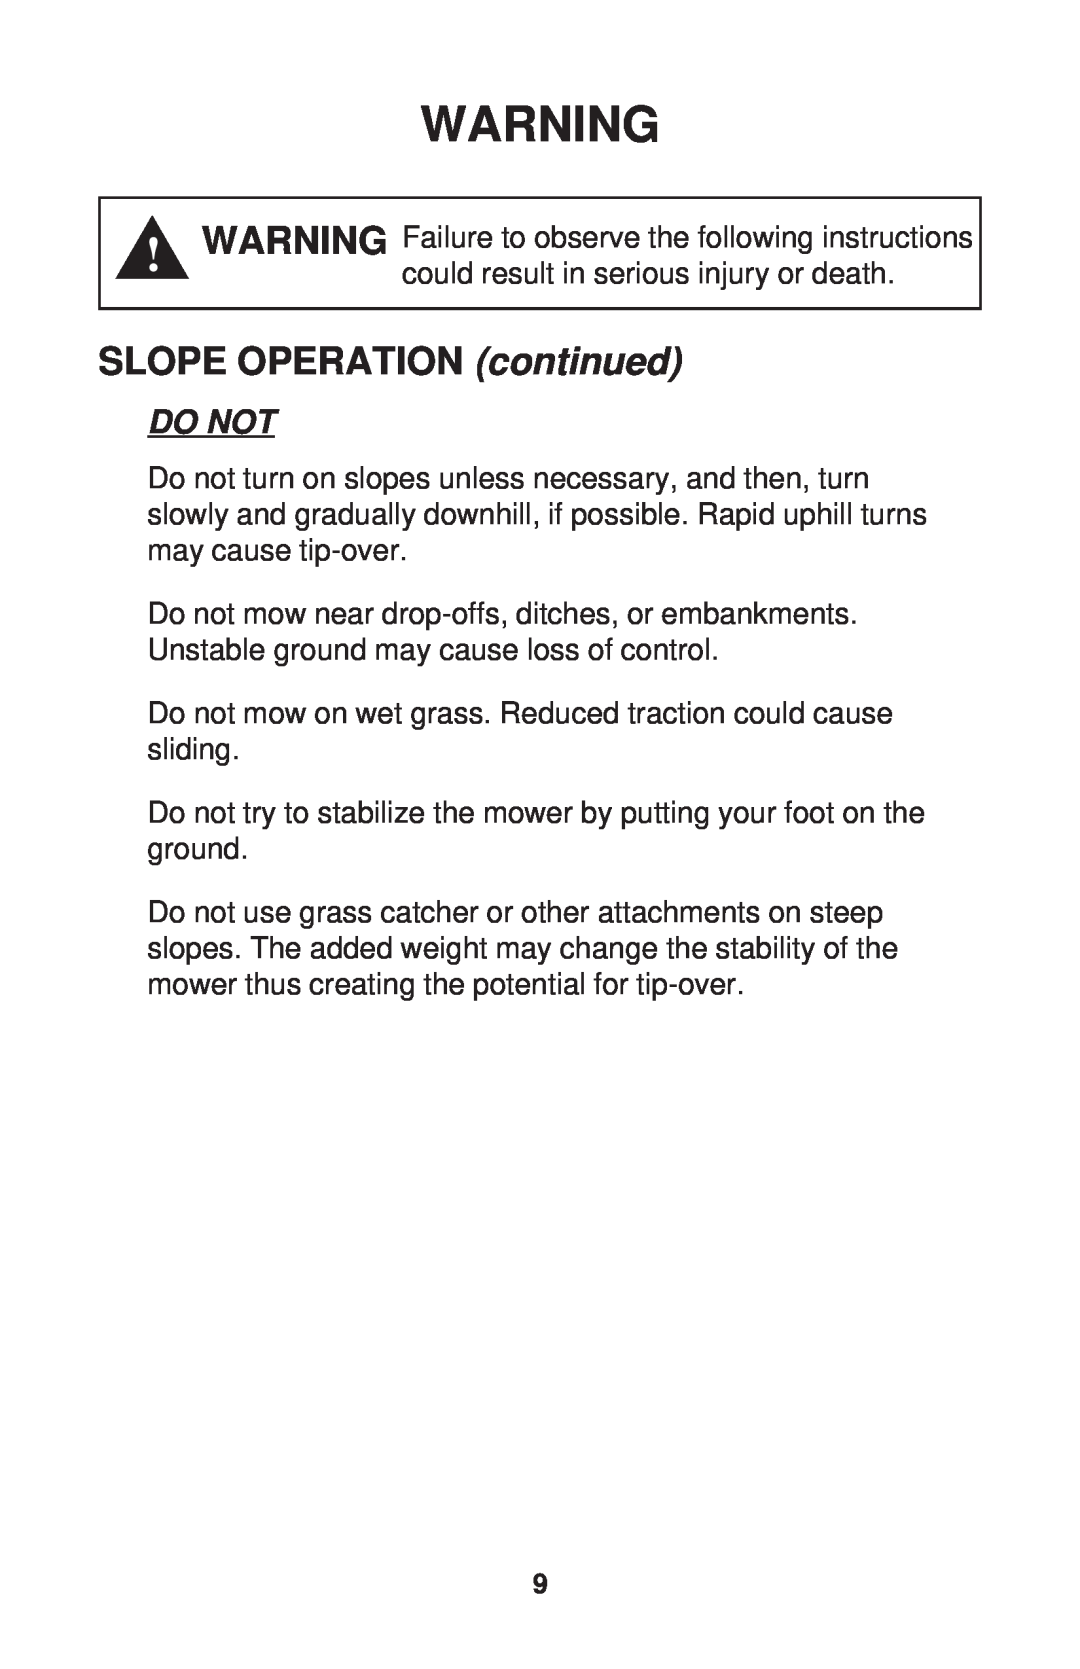 Dixon ZTR 34, ZTR 44, ZTR 34 manual SLOPE OPERATION continued, Do Not 